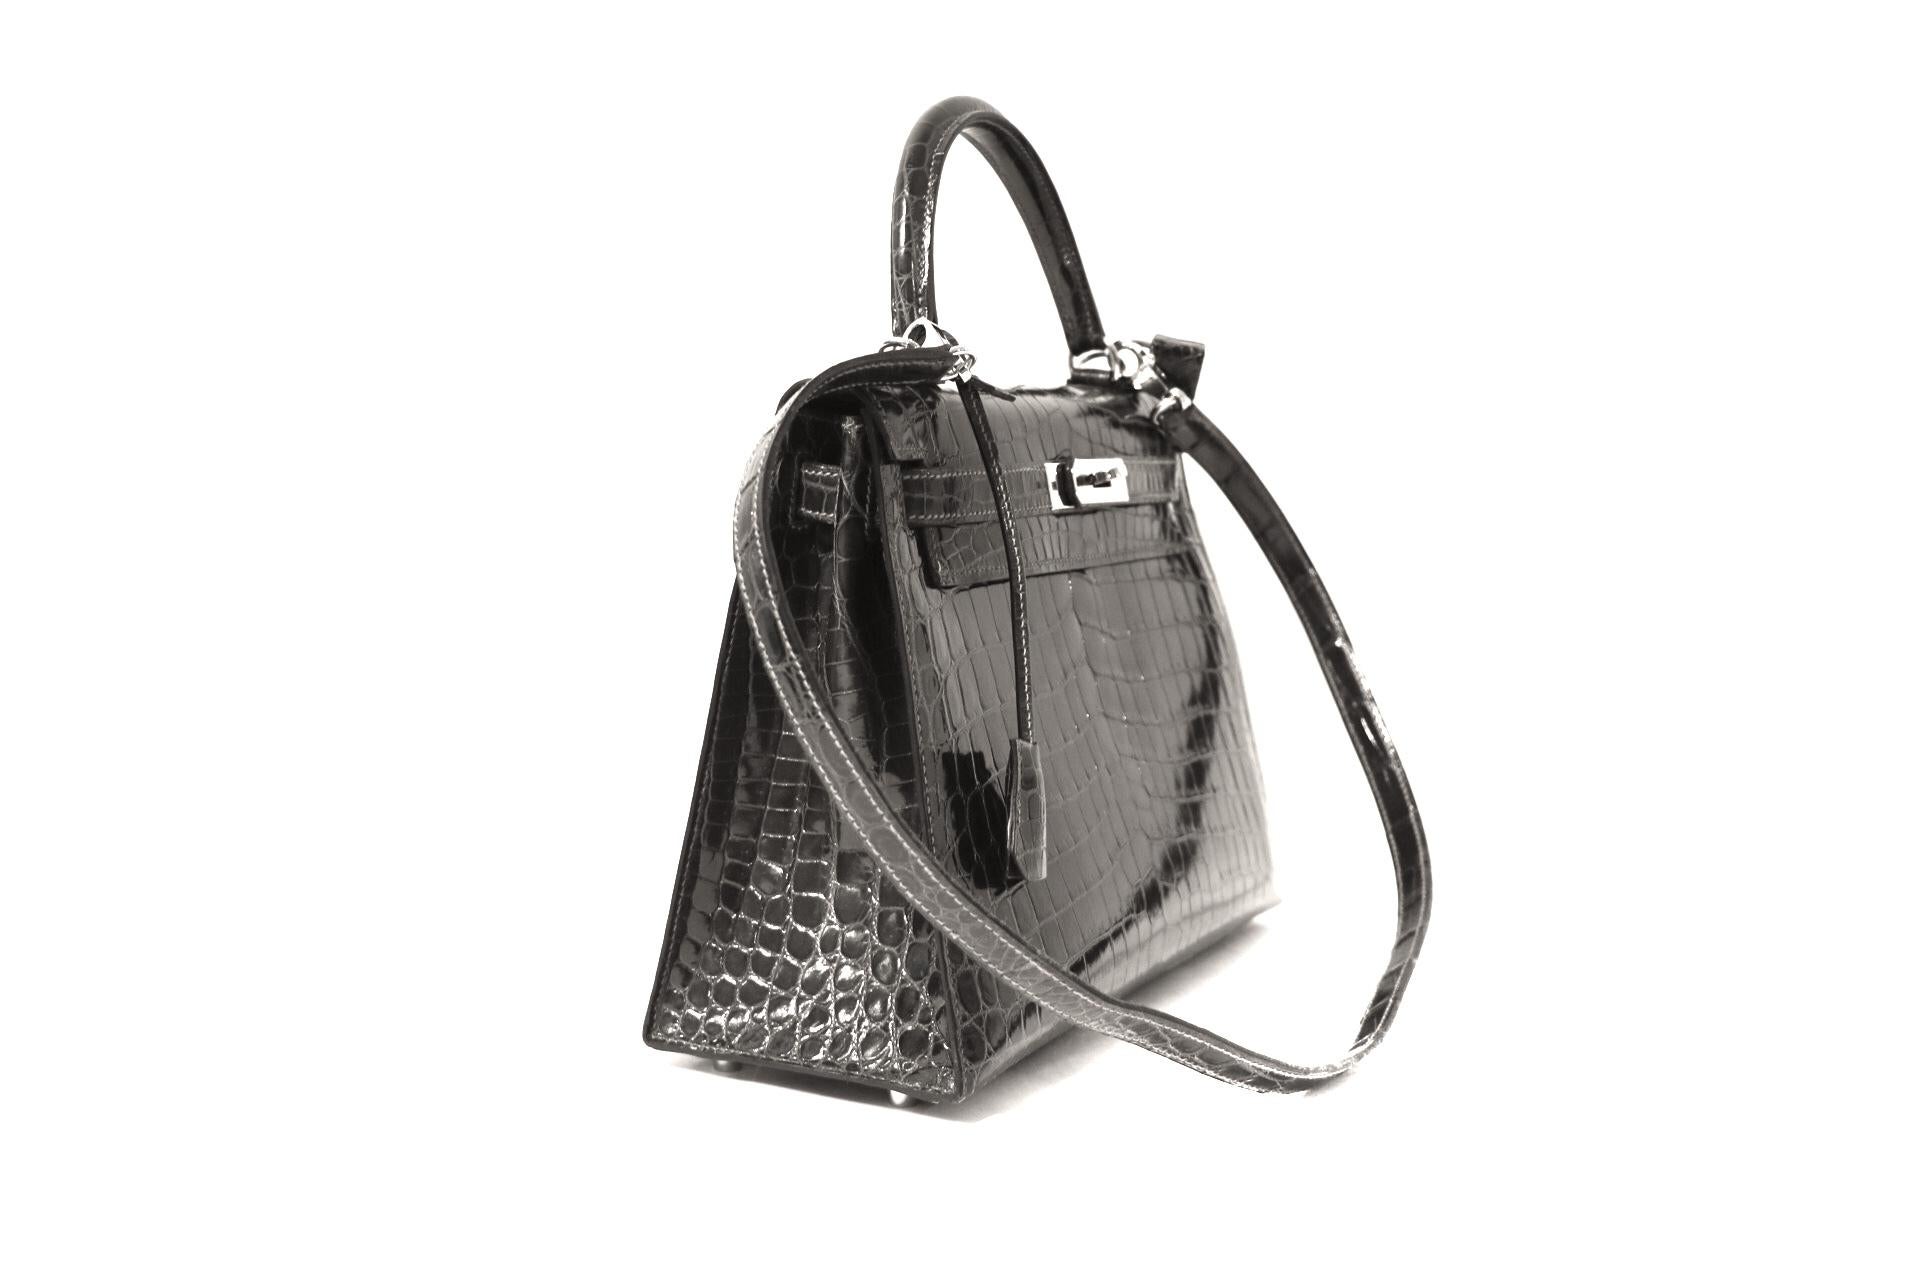 This authentic Hermès Graphite Crocodile 32 cm Kelly Bag is in pristine  condition.   Hermès bags are considered the ultimate luxury item the world over.  Hand stitched by skilled craftsmen, wait lists of a year or more are commonplace for the